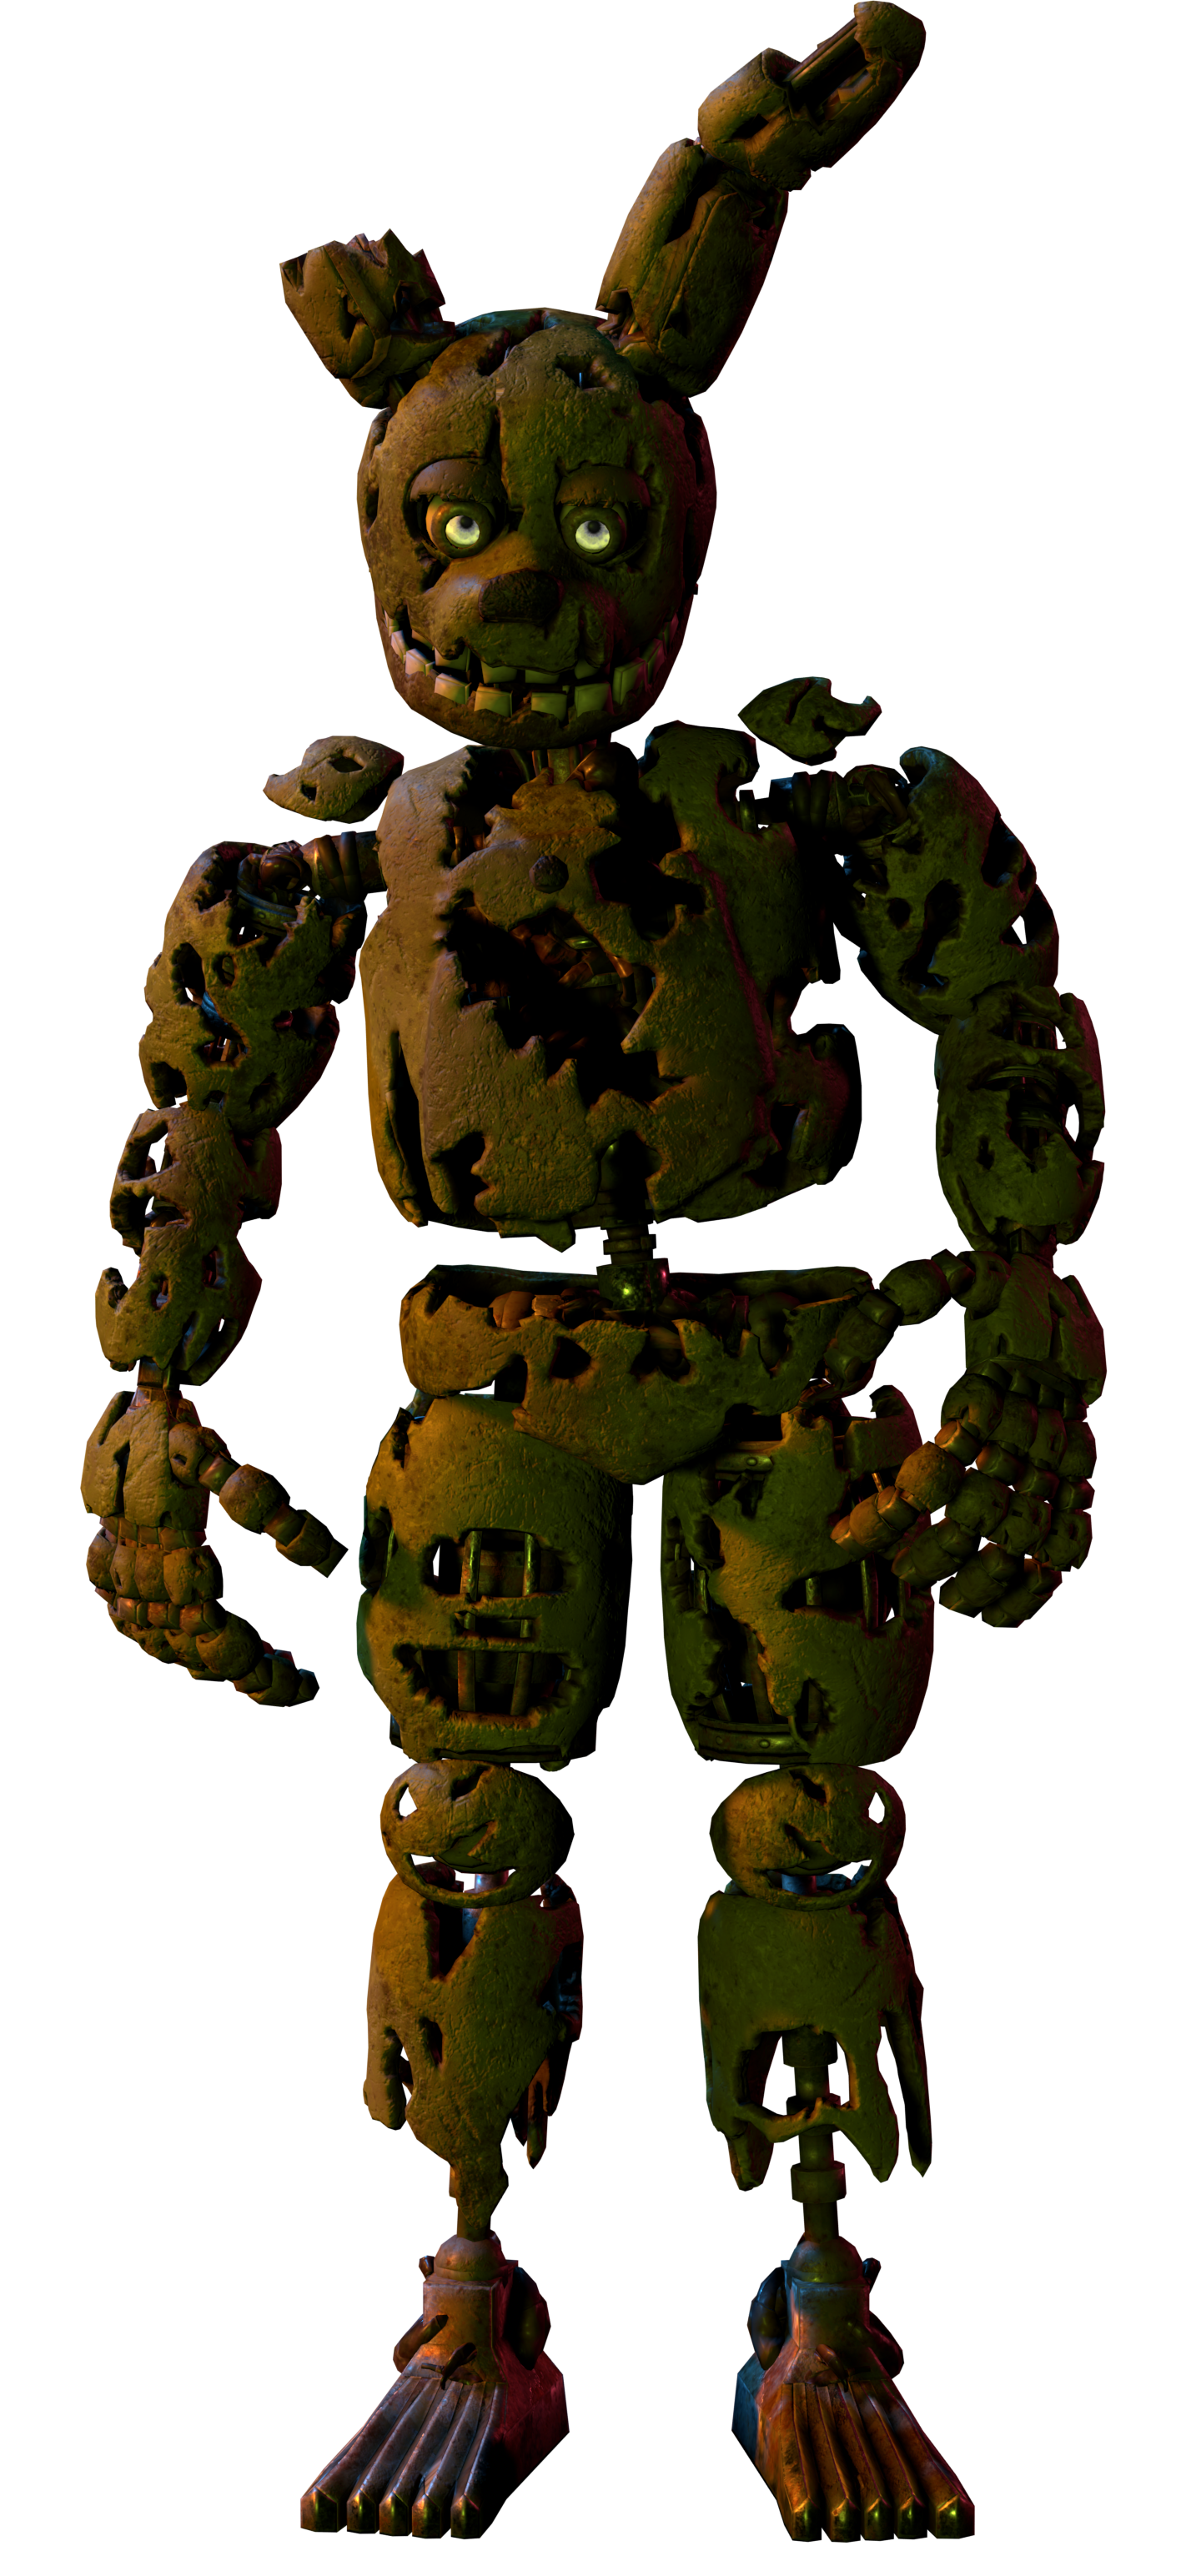 https://static.wikia.nocookie.net/triple-a-fazbear/images/9/91/Springtrap_hw_by_Scrappyboi2.png/revision/latest?cb=20200714080640